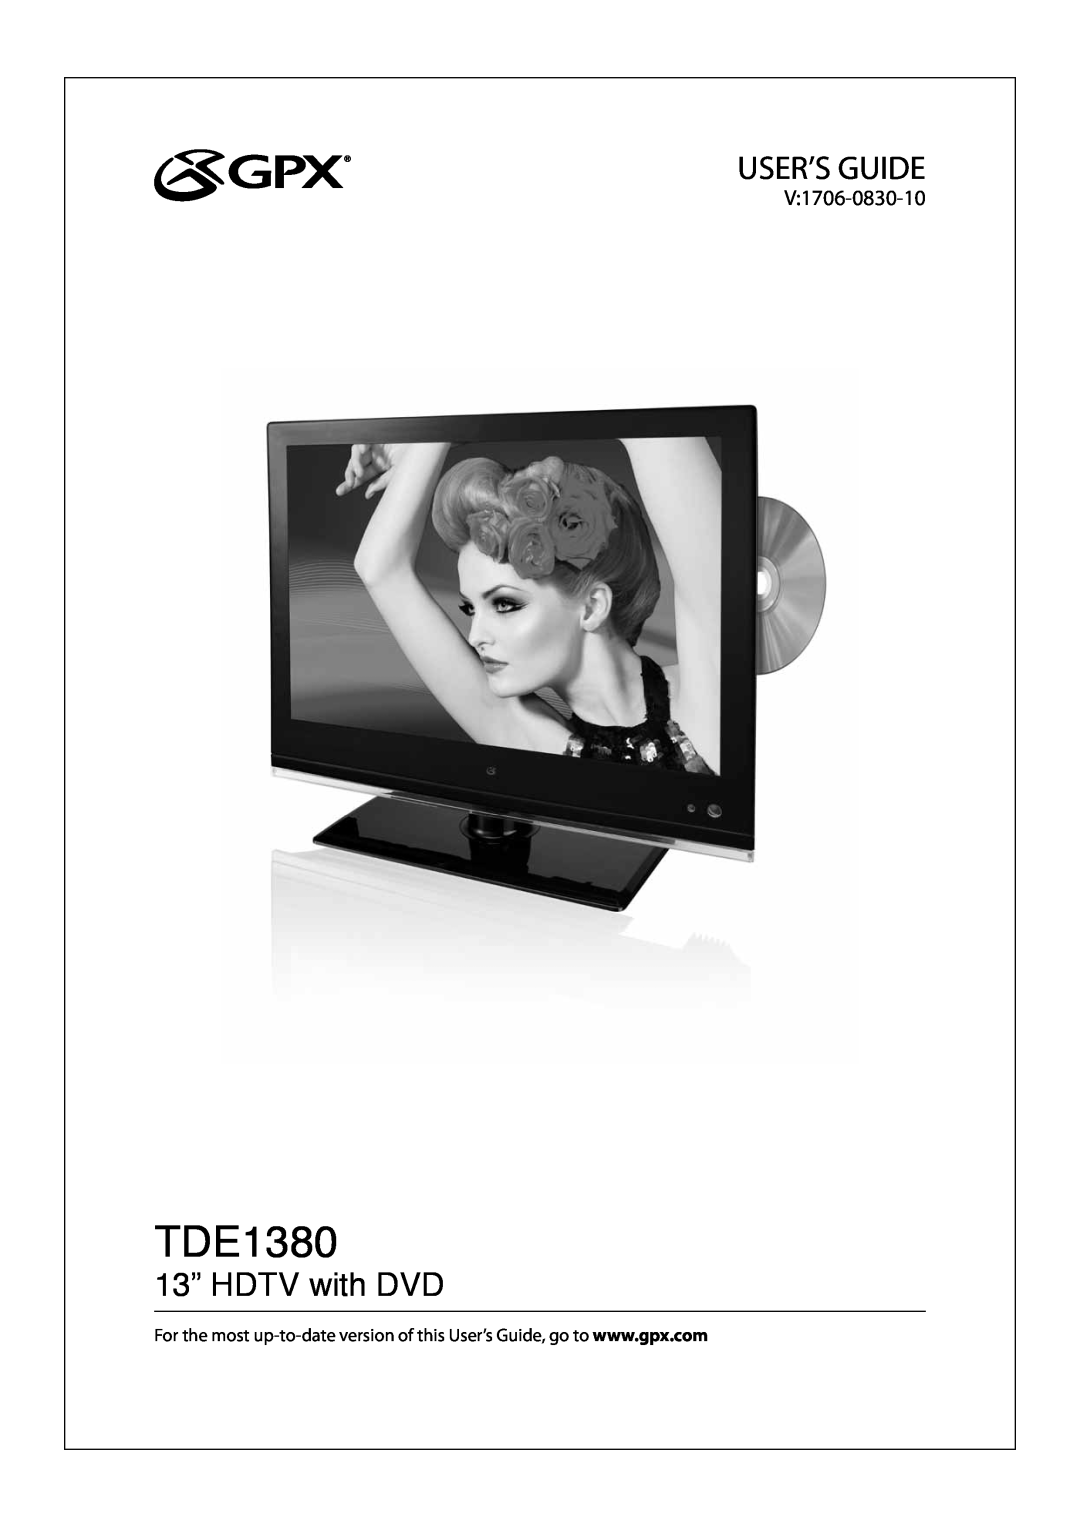 GPX TDE1380 manual User’S Guide, 13” HDTV with DVD 